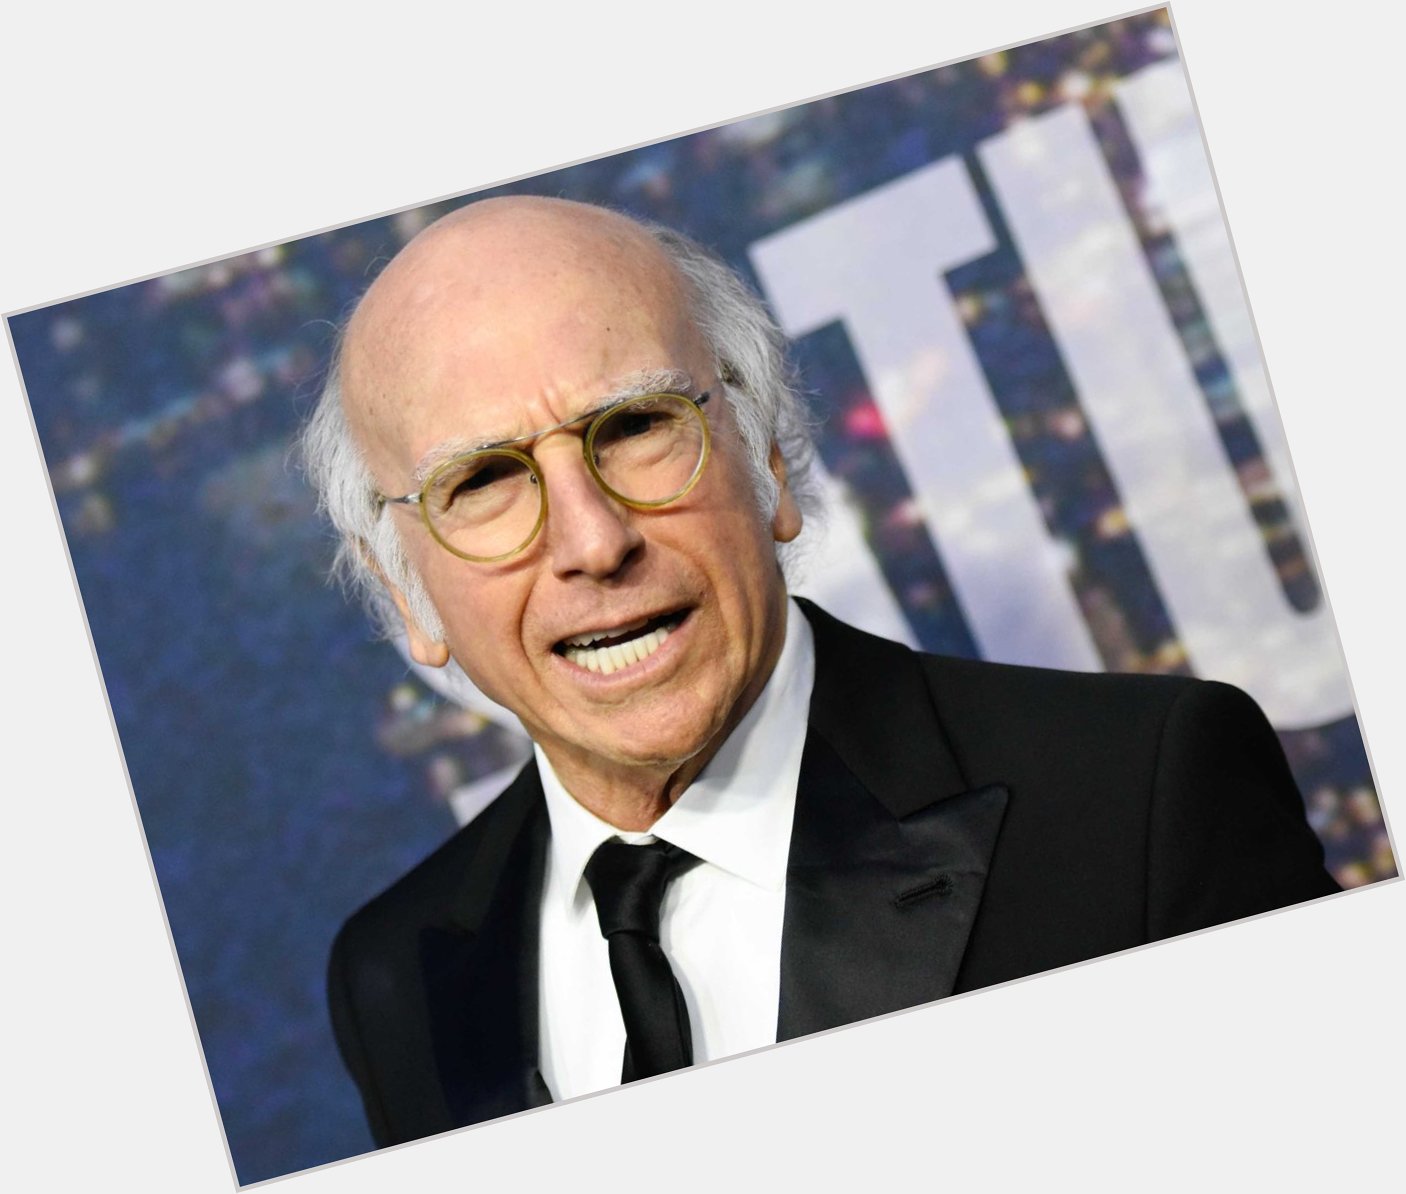  Happy Birthday, Larry David! Today it\s all about you.

Today\s Topic: songs about narcissists 